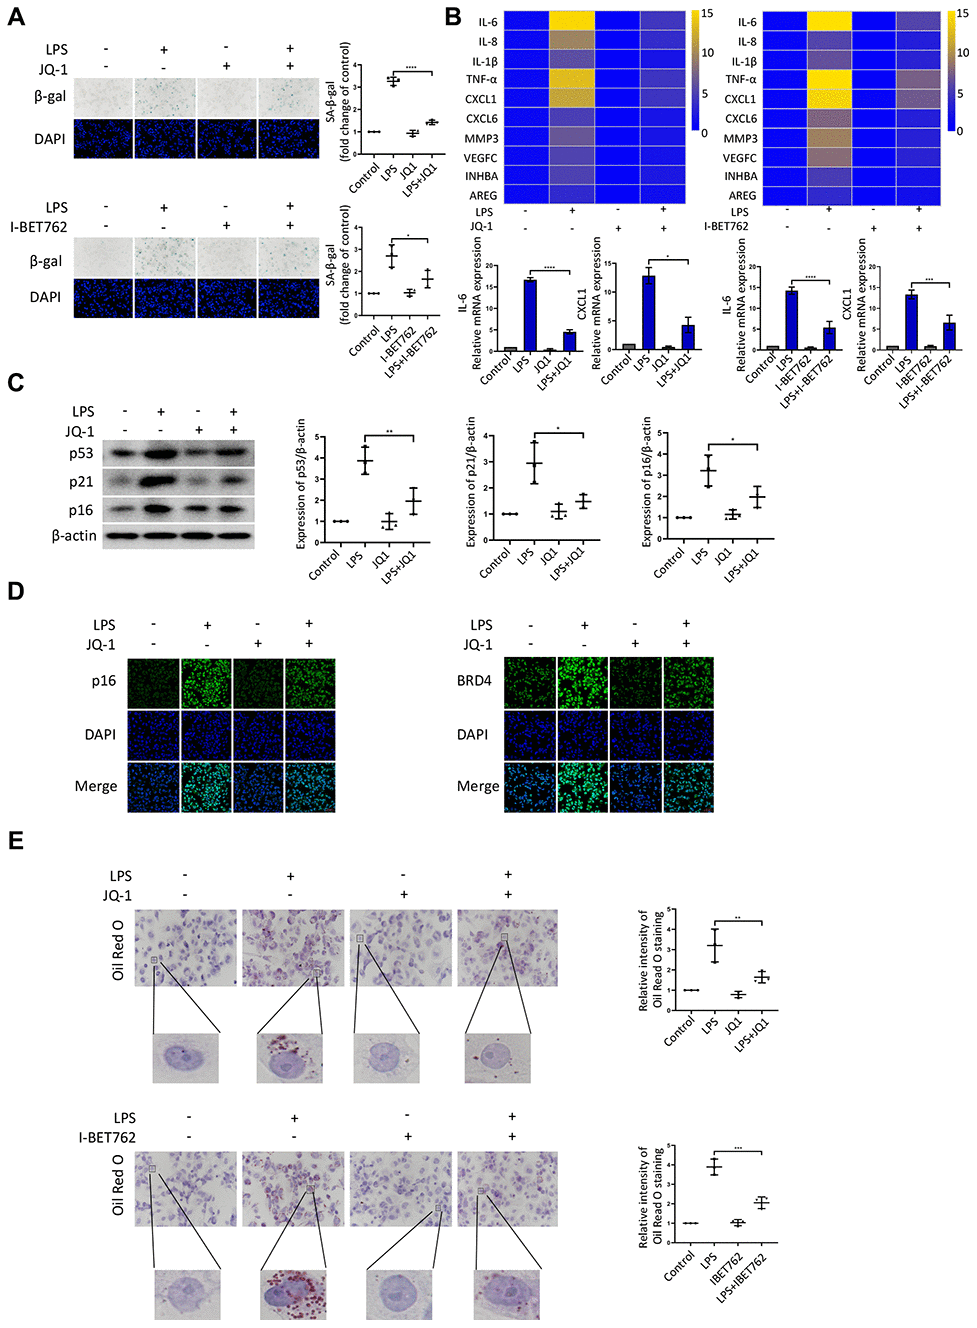 BRD4 is a novel target for the prevention of macrophage senescence. THP-1 macrophages were incubated with or without LPS. The cells were then treated with the inhibitors JQ-1 or I-BET762. (A) SA-β-gal staining was performed and quantified. (B) The mRNA levels of the relative expression of SASP genes are shown in the cluster heatmaps. The histogram on the right shows the exact mRNA levels of IL-6 and CXCL1. (C) The protein levels of the senescence markers p53, p21, and p16 were evaluated by western blotting. (D) The immunofluorescence of THP-1 cells stained for p16 (green), BRD4 (green), and DAPI (blue) was observed by confocal microscopy. (E) Representative ORO staining and statistical data were used to analyze the lipid accumulation of THP-1 macrophages. The data all represent measurement data presented as the mean ± SD. The different groups were statistically analyzed using one-way ANOVA. Significant differences among the different groups are indicated as *p p p p 